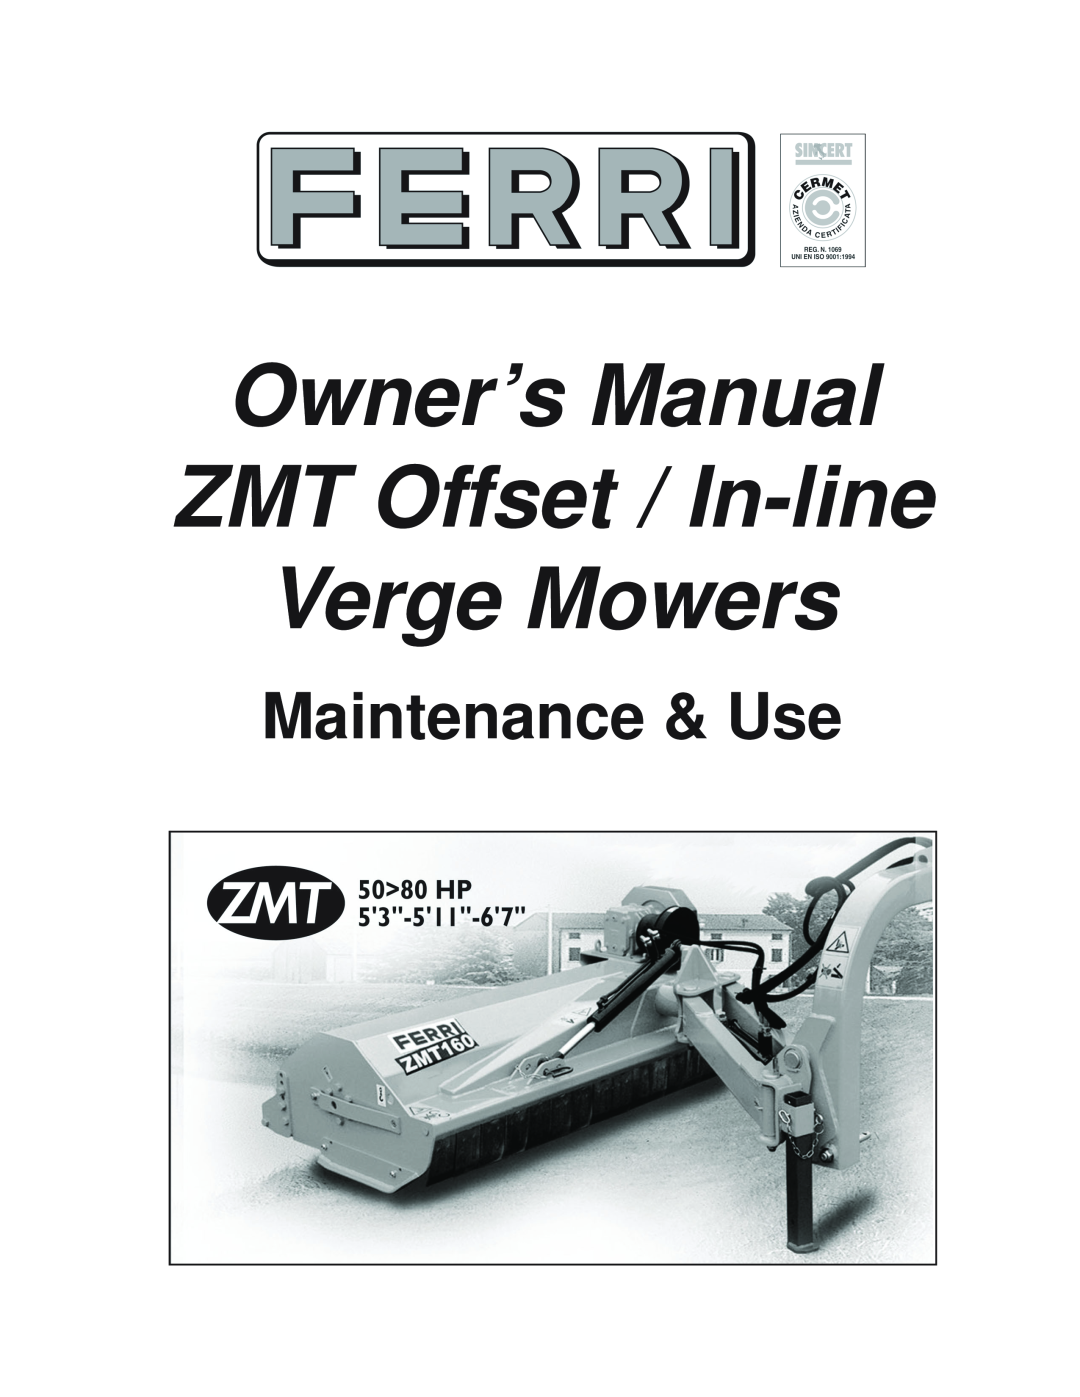 Ferris Industries 160 owner manual ZMT Owner’s Manual, Maintenance & Use 